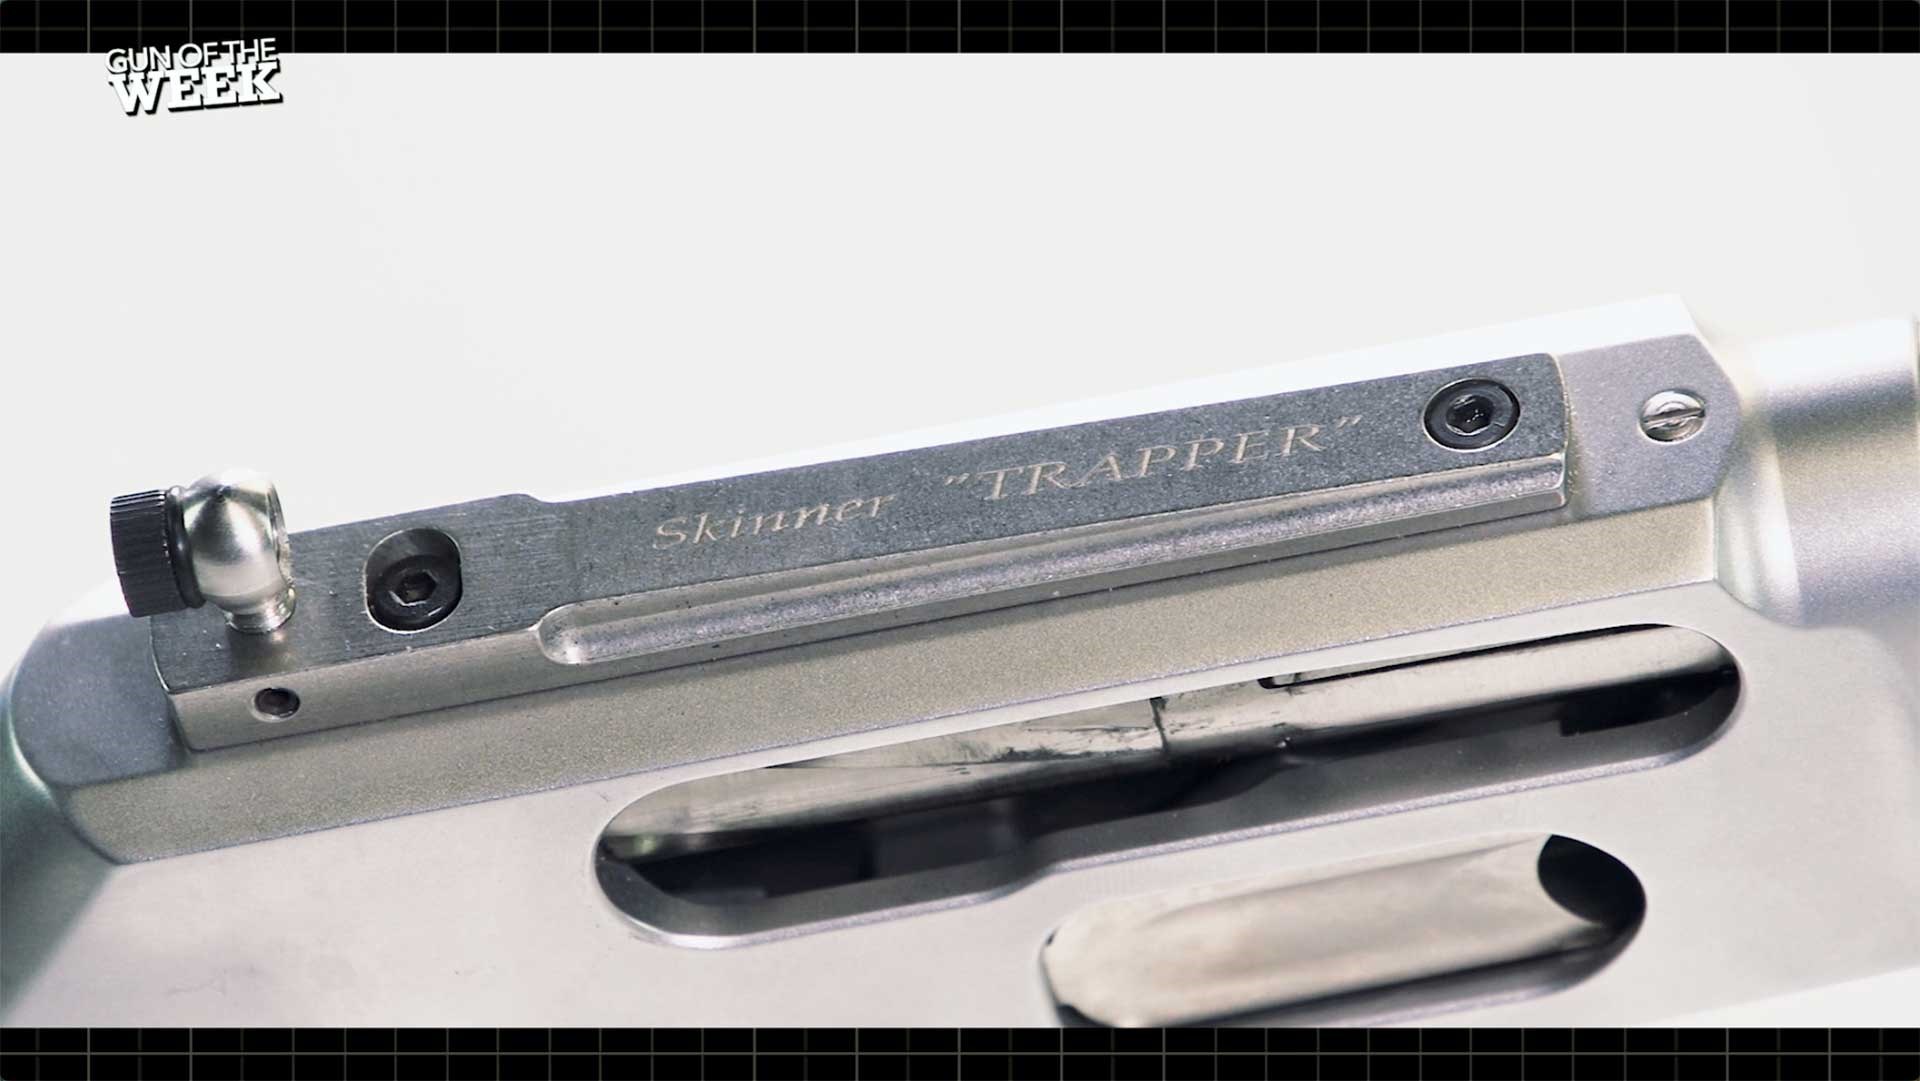 Top of Marlin 1895 Trapper receiver shown with its Skinner "Trapper" ghost-ring rear sight mount.